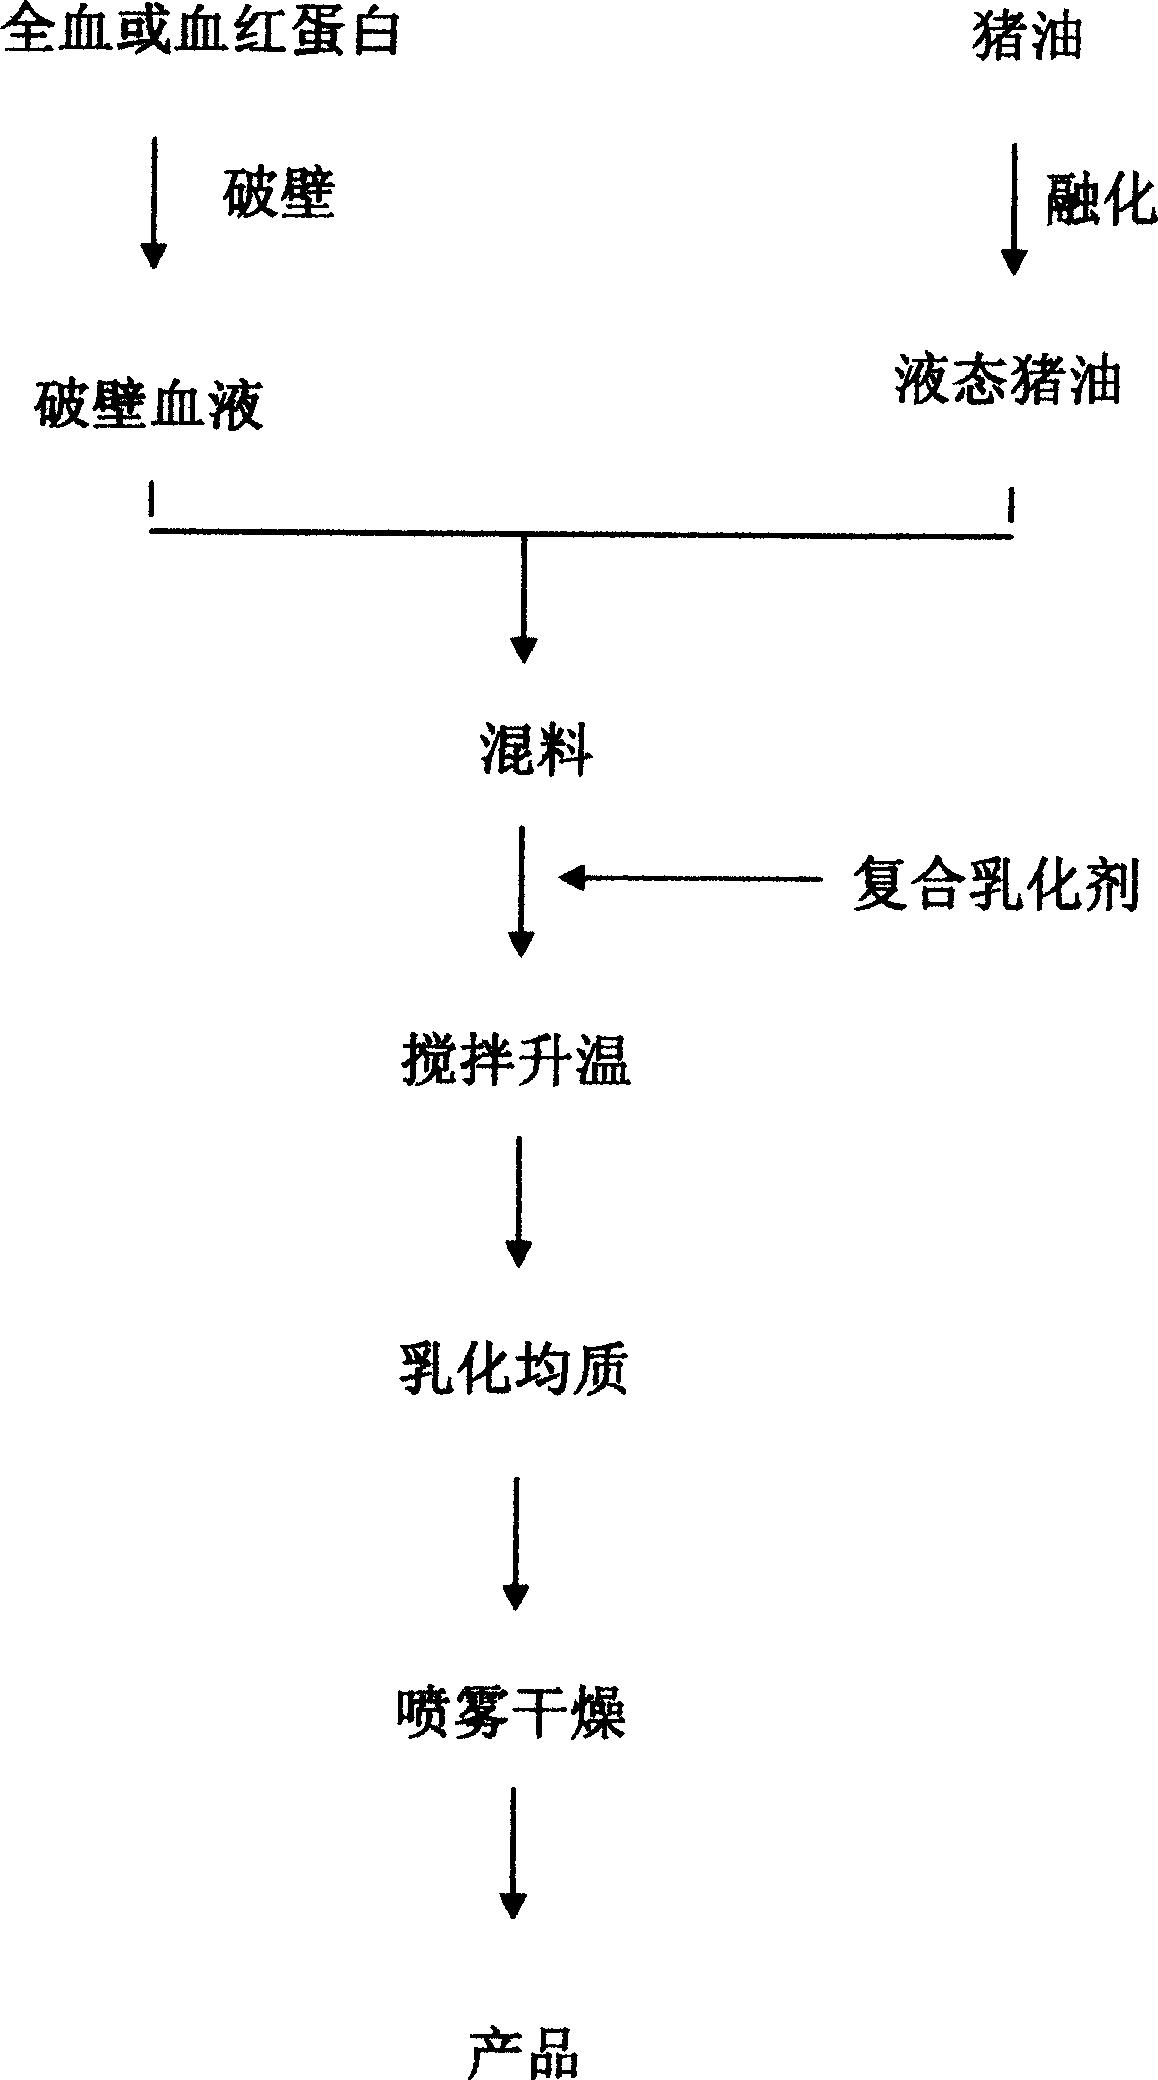 Method for producing powder blood fat